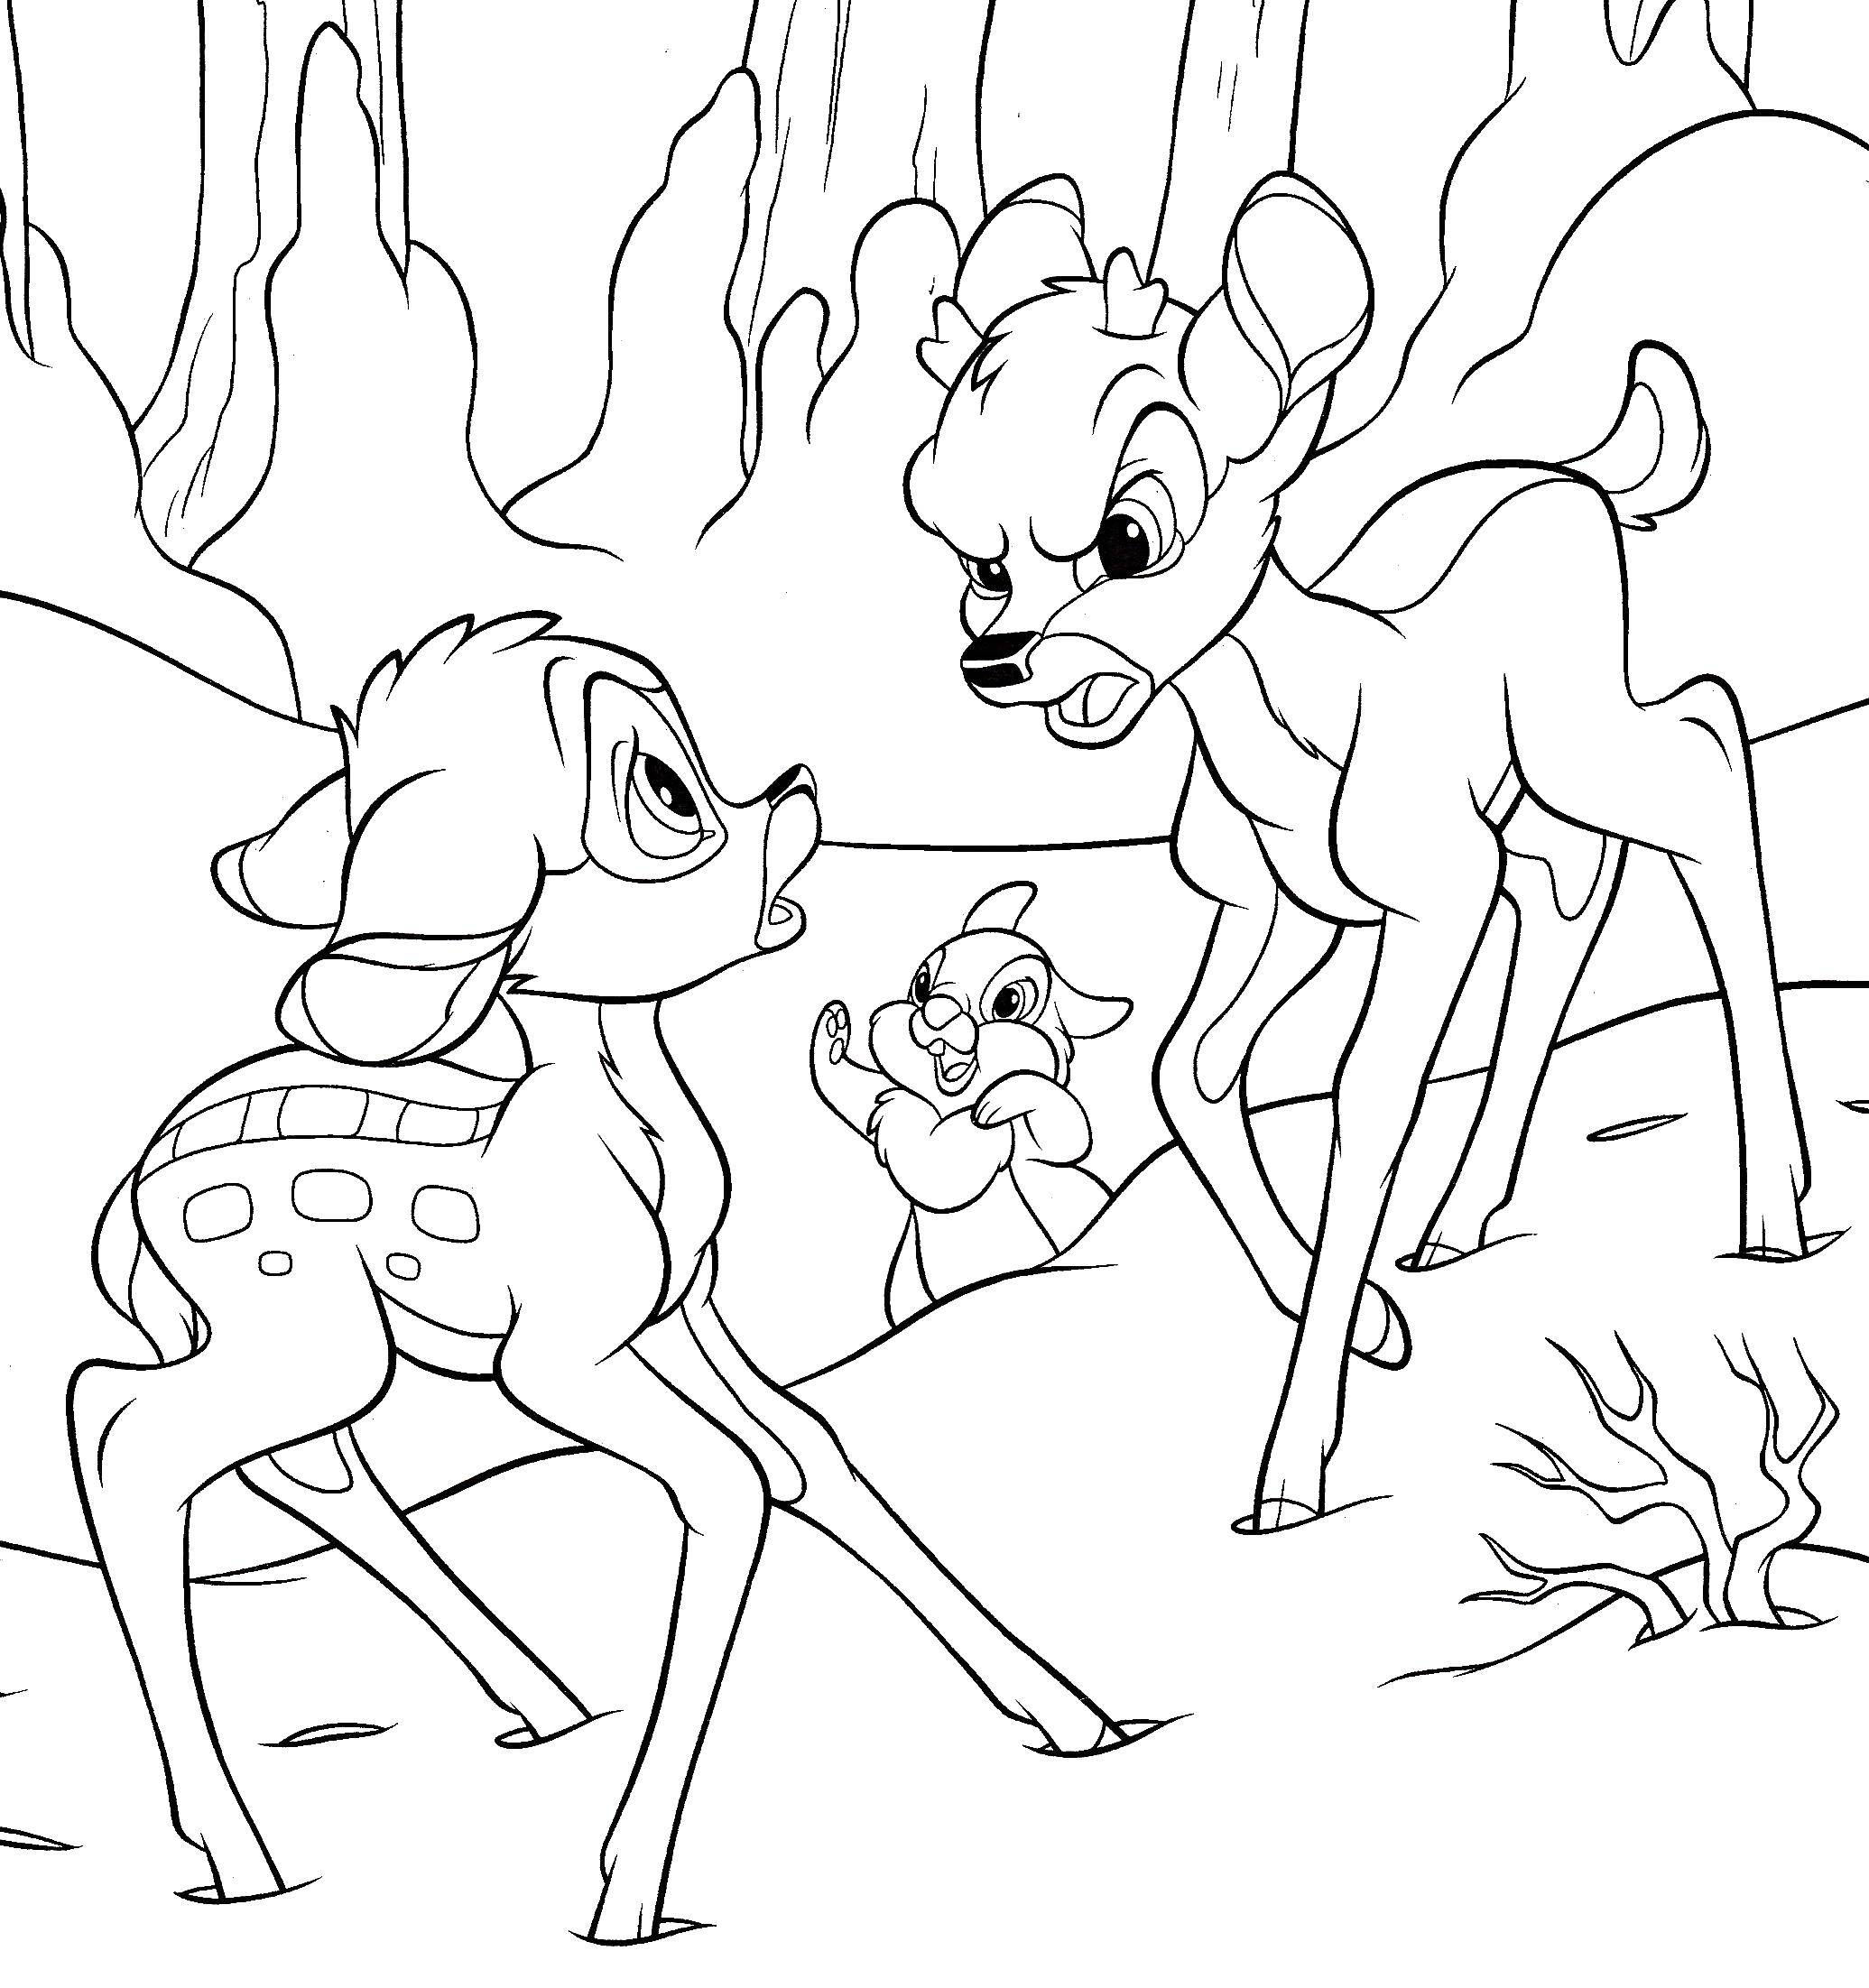 Coloring Two deer and a hare. Category Disney coloring pages. Tags:  Disney cartoons, deer, Bunny.